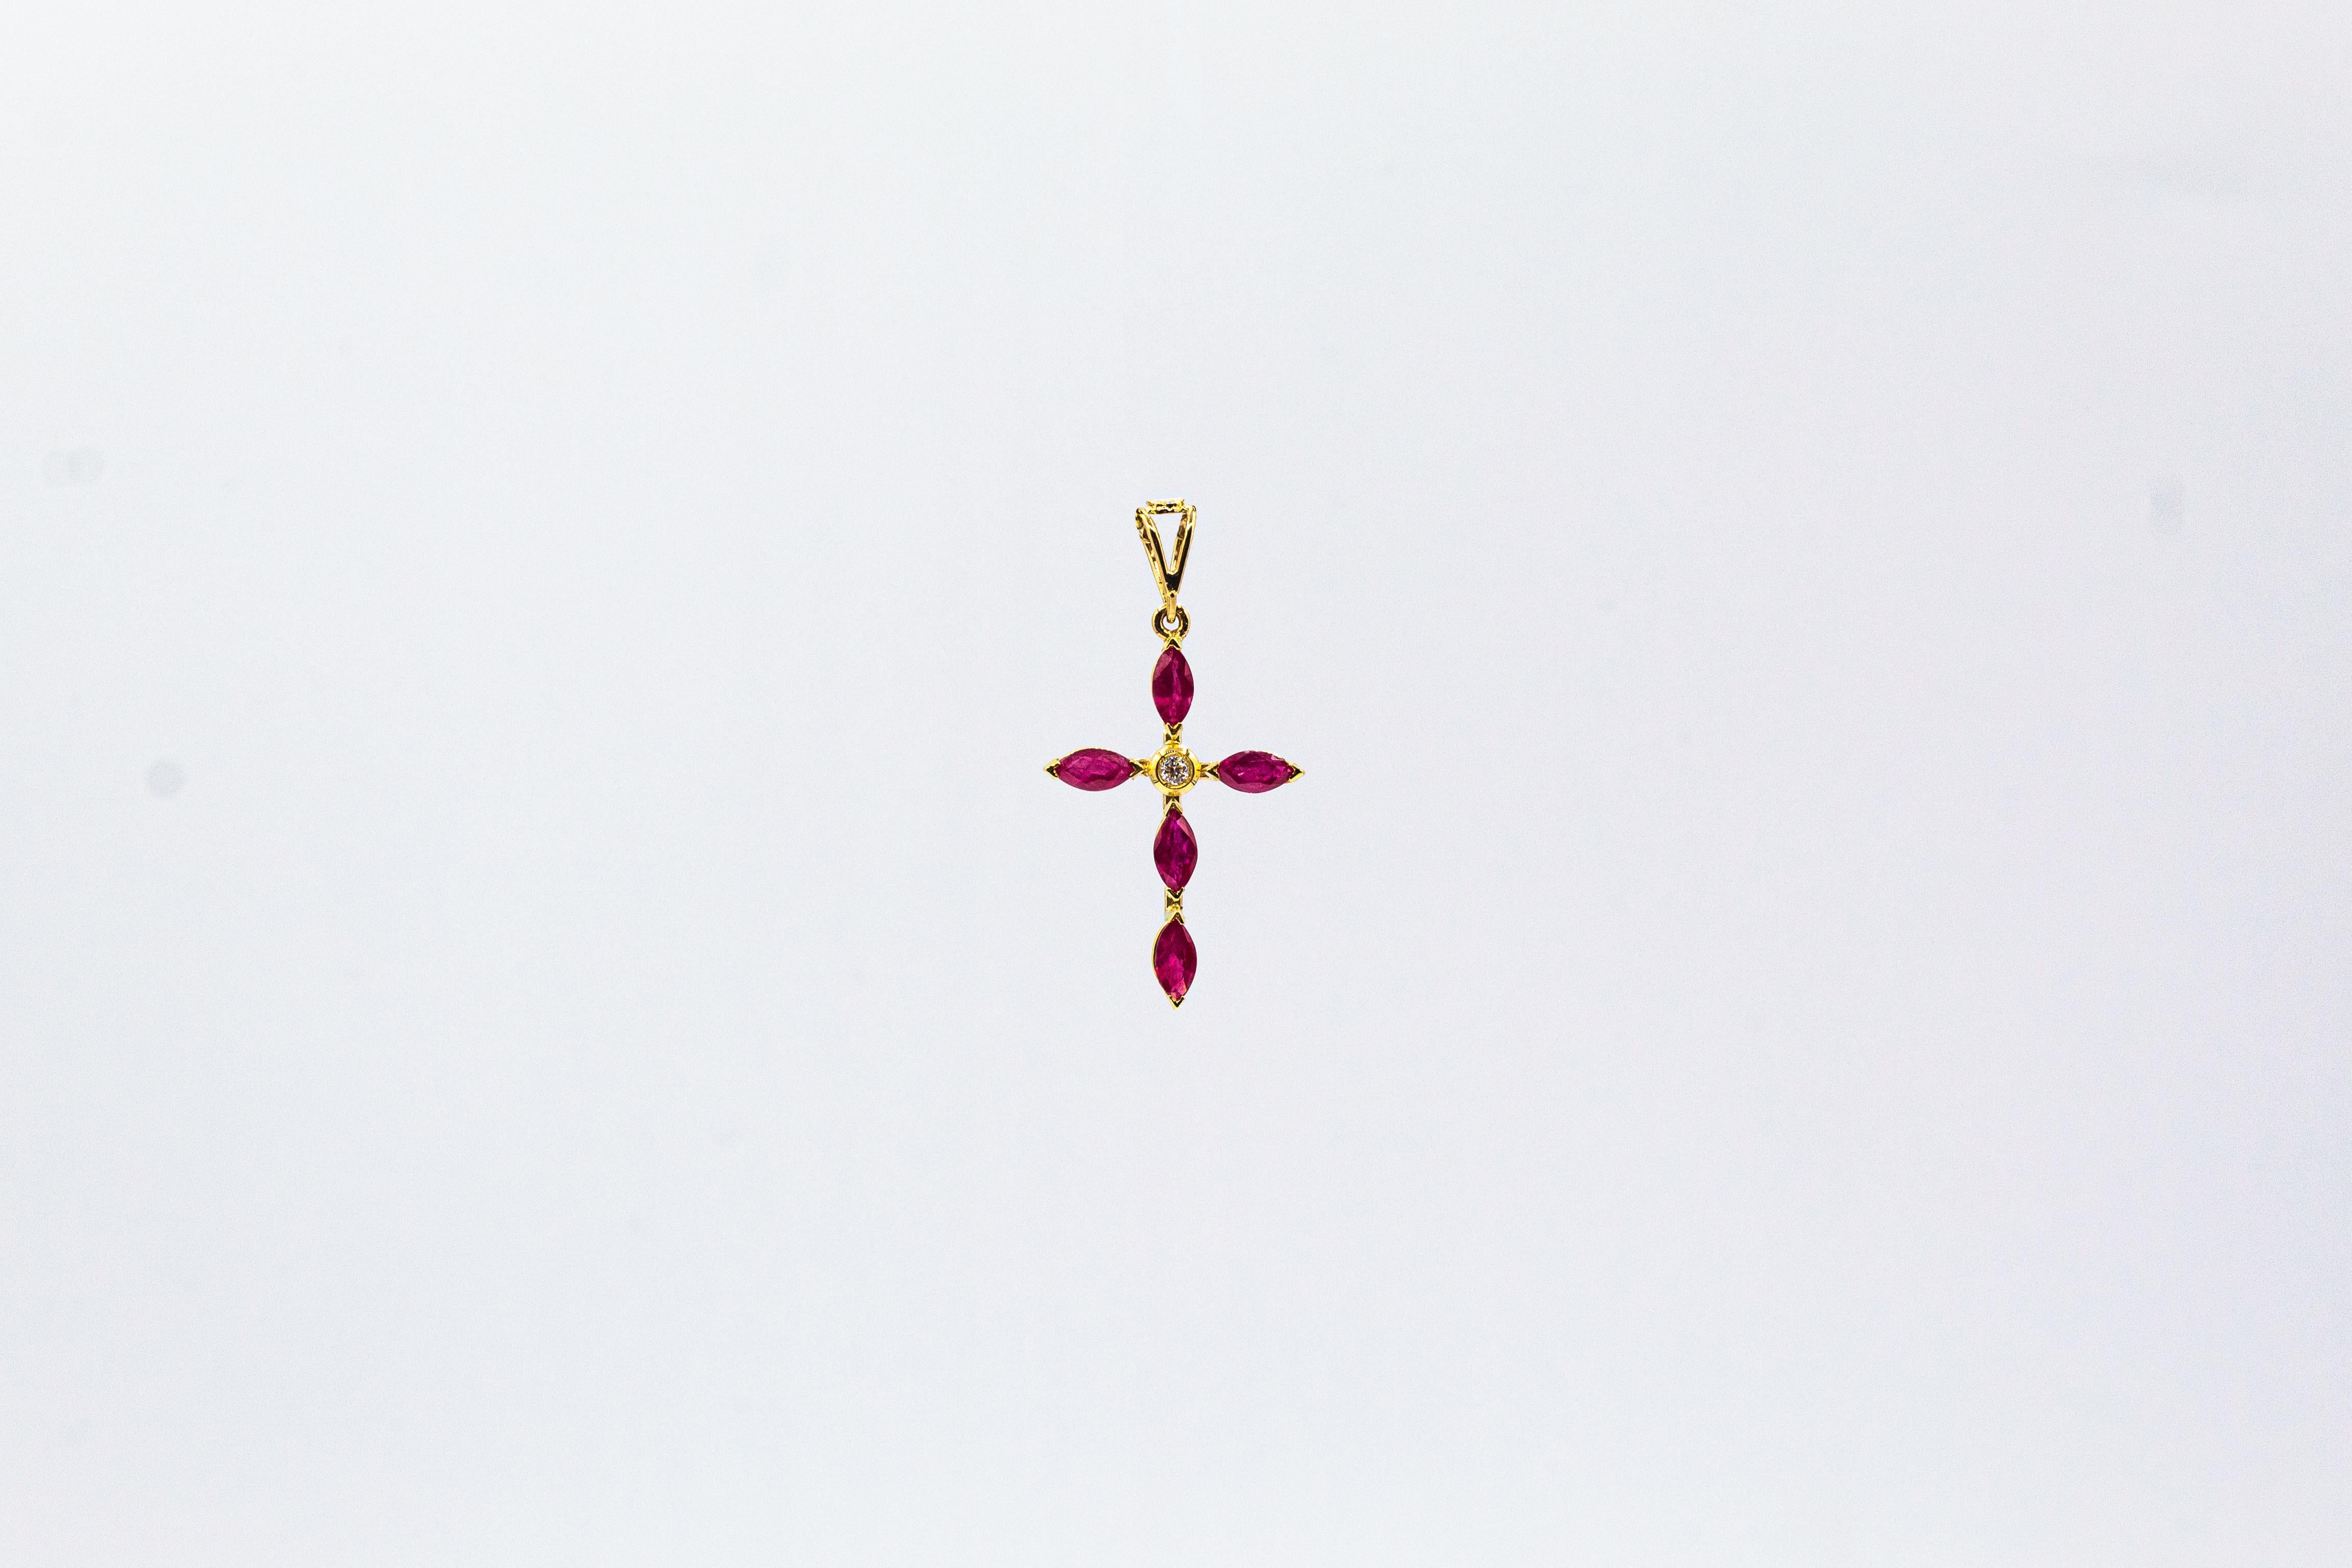 This Pendant is made of 18K Yellow Gold.
This Pendant has a 0.04 Carats White Brilliant Cut Diamonds.
This Pendant has 1.60 Carats of Marquise Cut Rubies.

This Pendant is available also in 9, 14 or 18K Yellow, White or Rose Gold.
This Pendant is